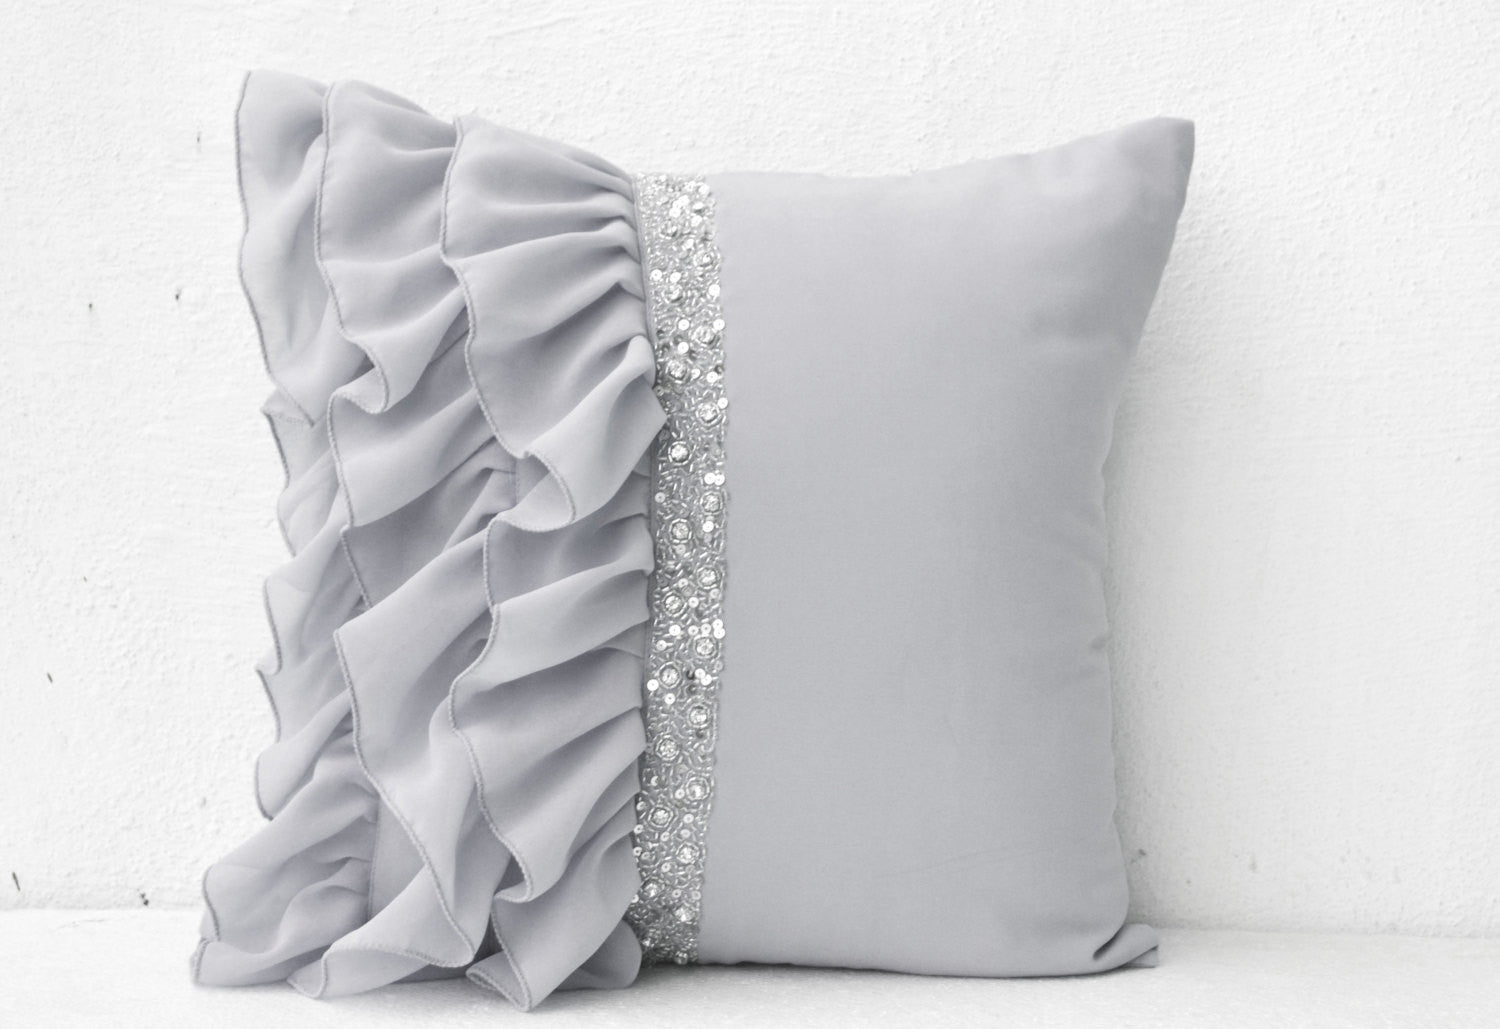 Handmade gray throw pillow with sequin and ruffles